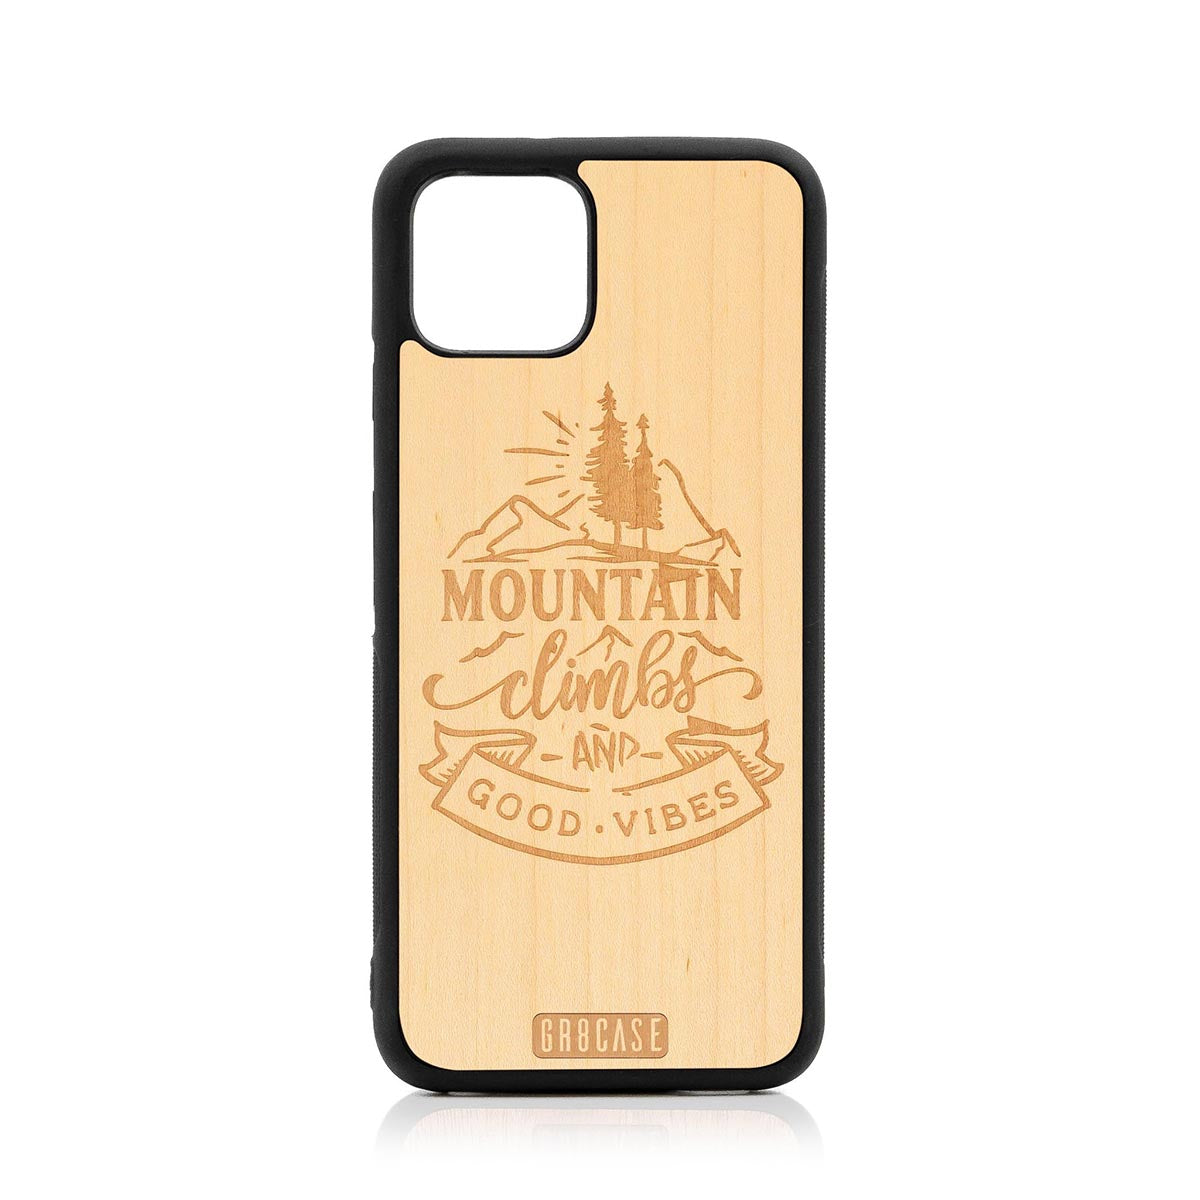 Mountain Climbs And Good Vibes Design Wood Case Google Pixel 4 by GR8CASE